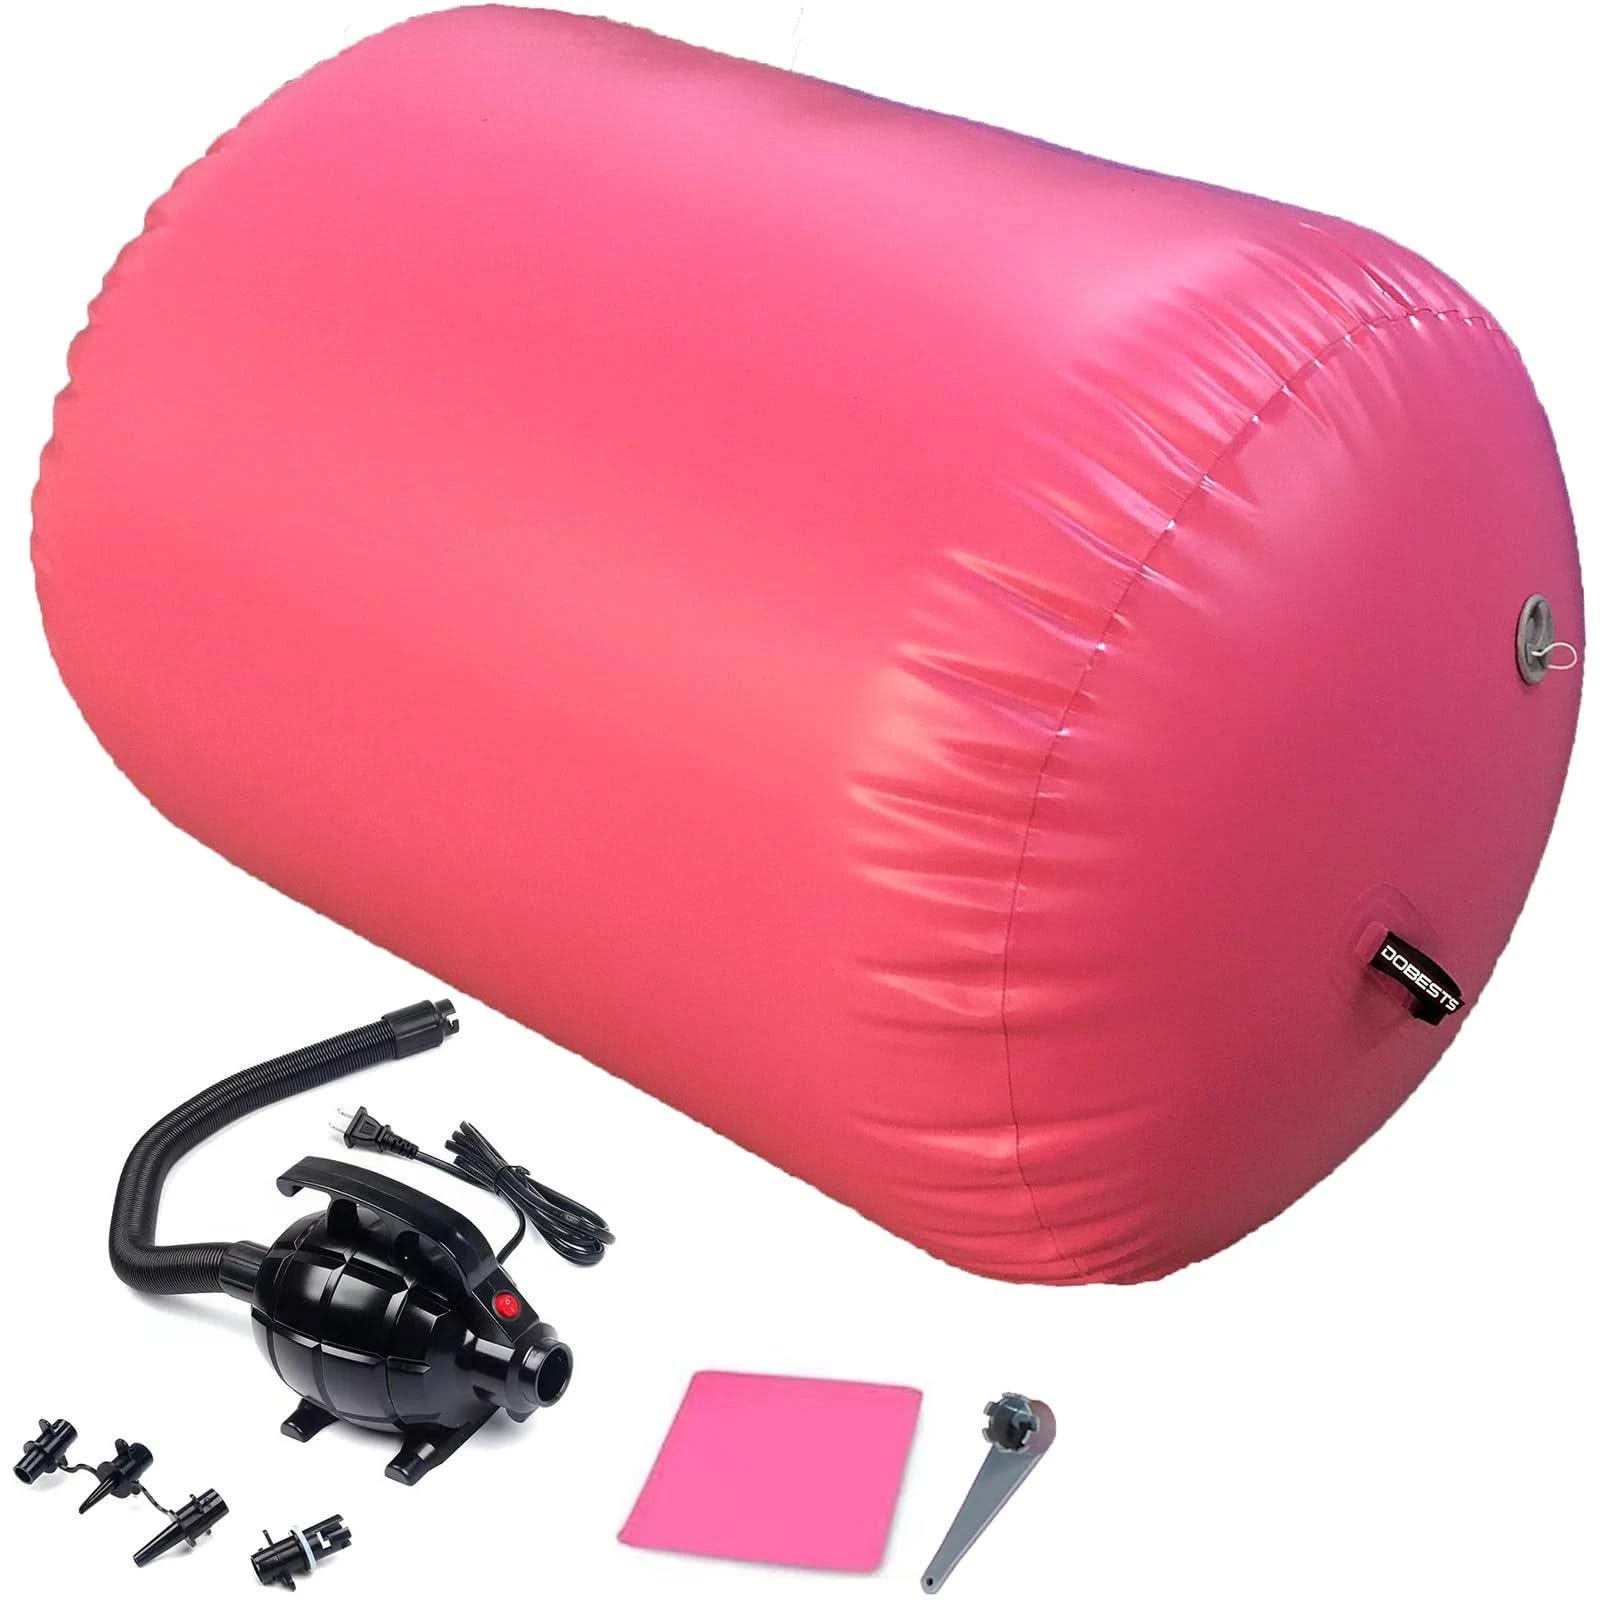 Inflatable Gymnastics Air Track Mat - Portable and Comfortable for Various Workouts | Image